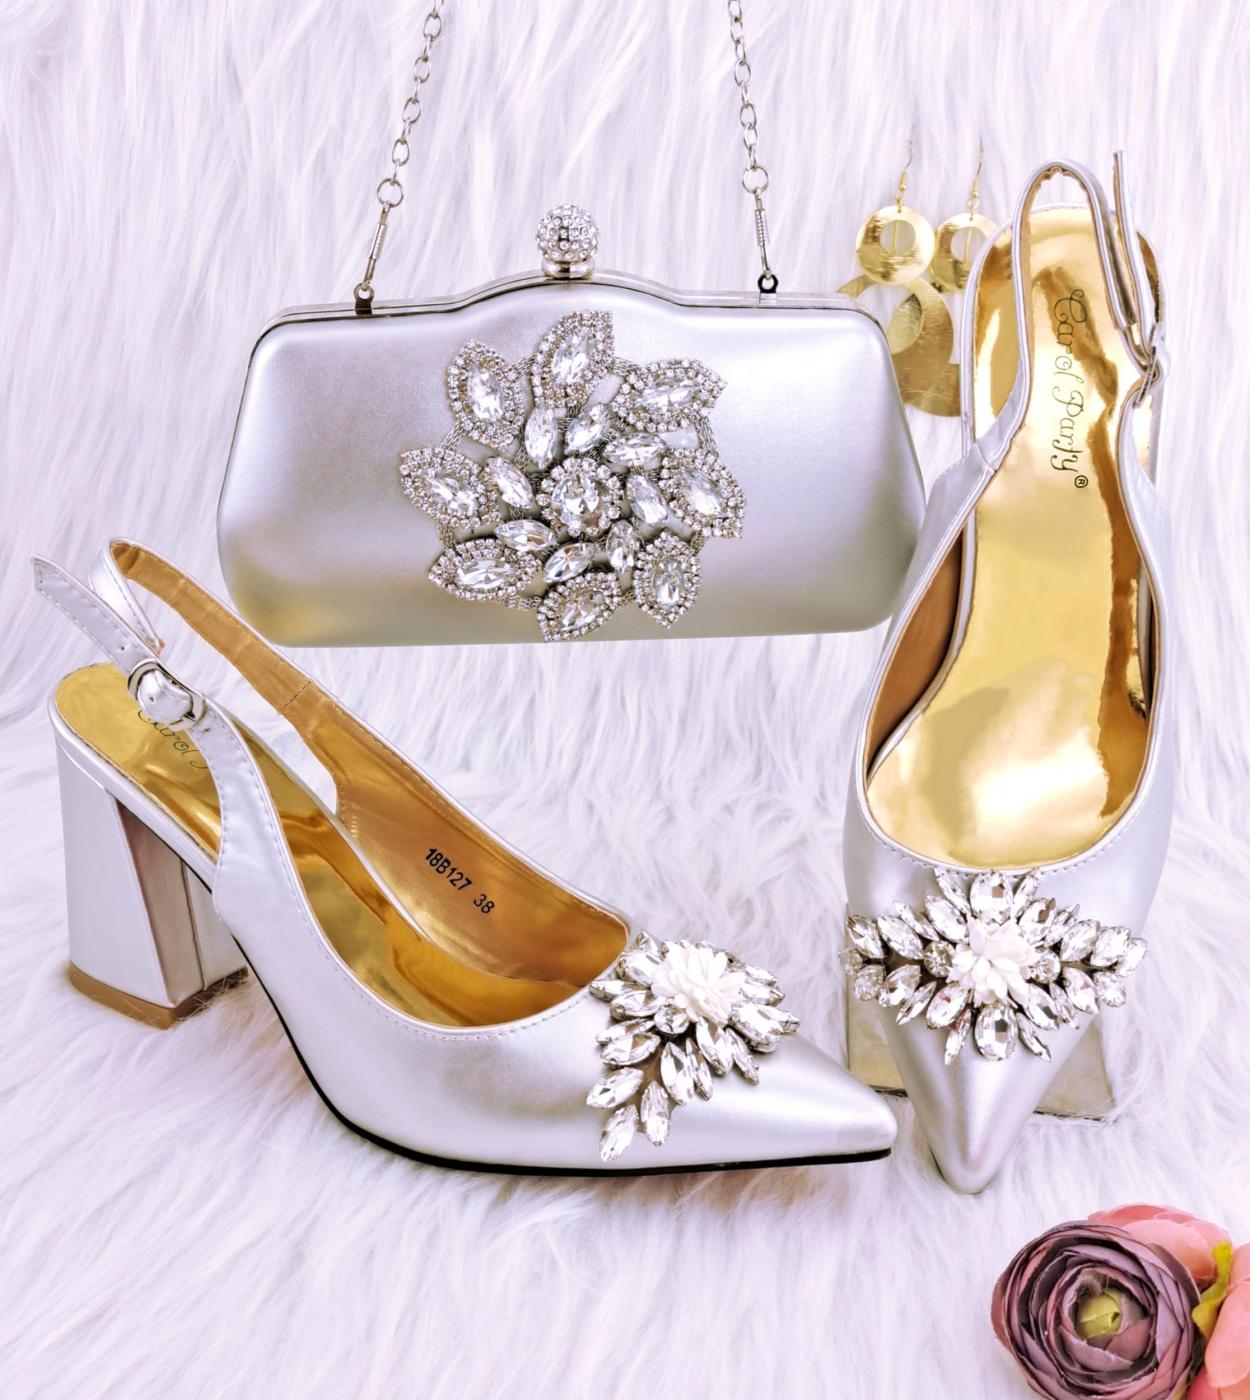 Qsgfc High End Party Shoes Bag Rhombus Diamond Accessories Pointed High Heels And Clutch Bag